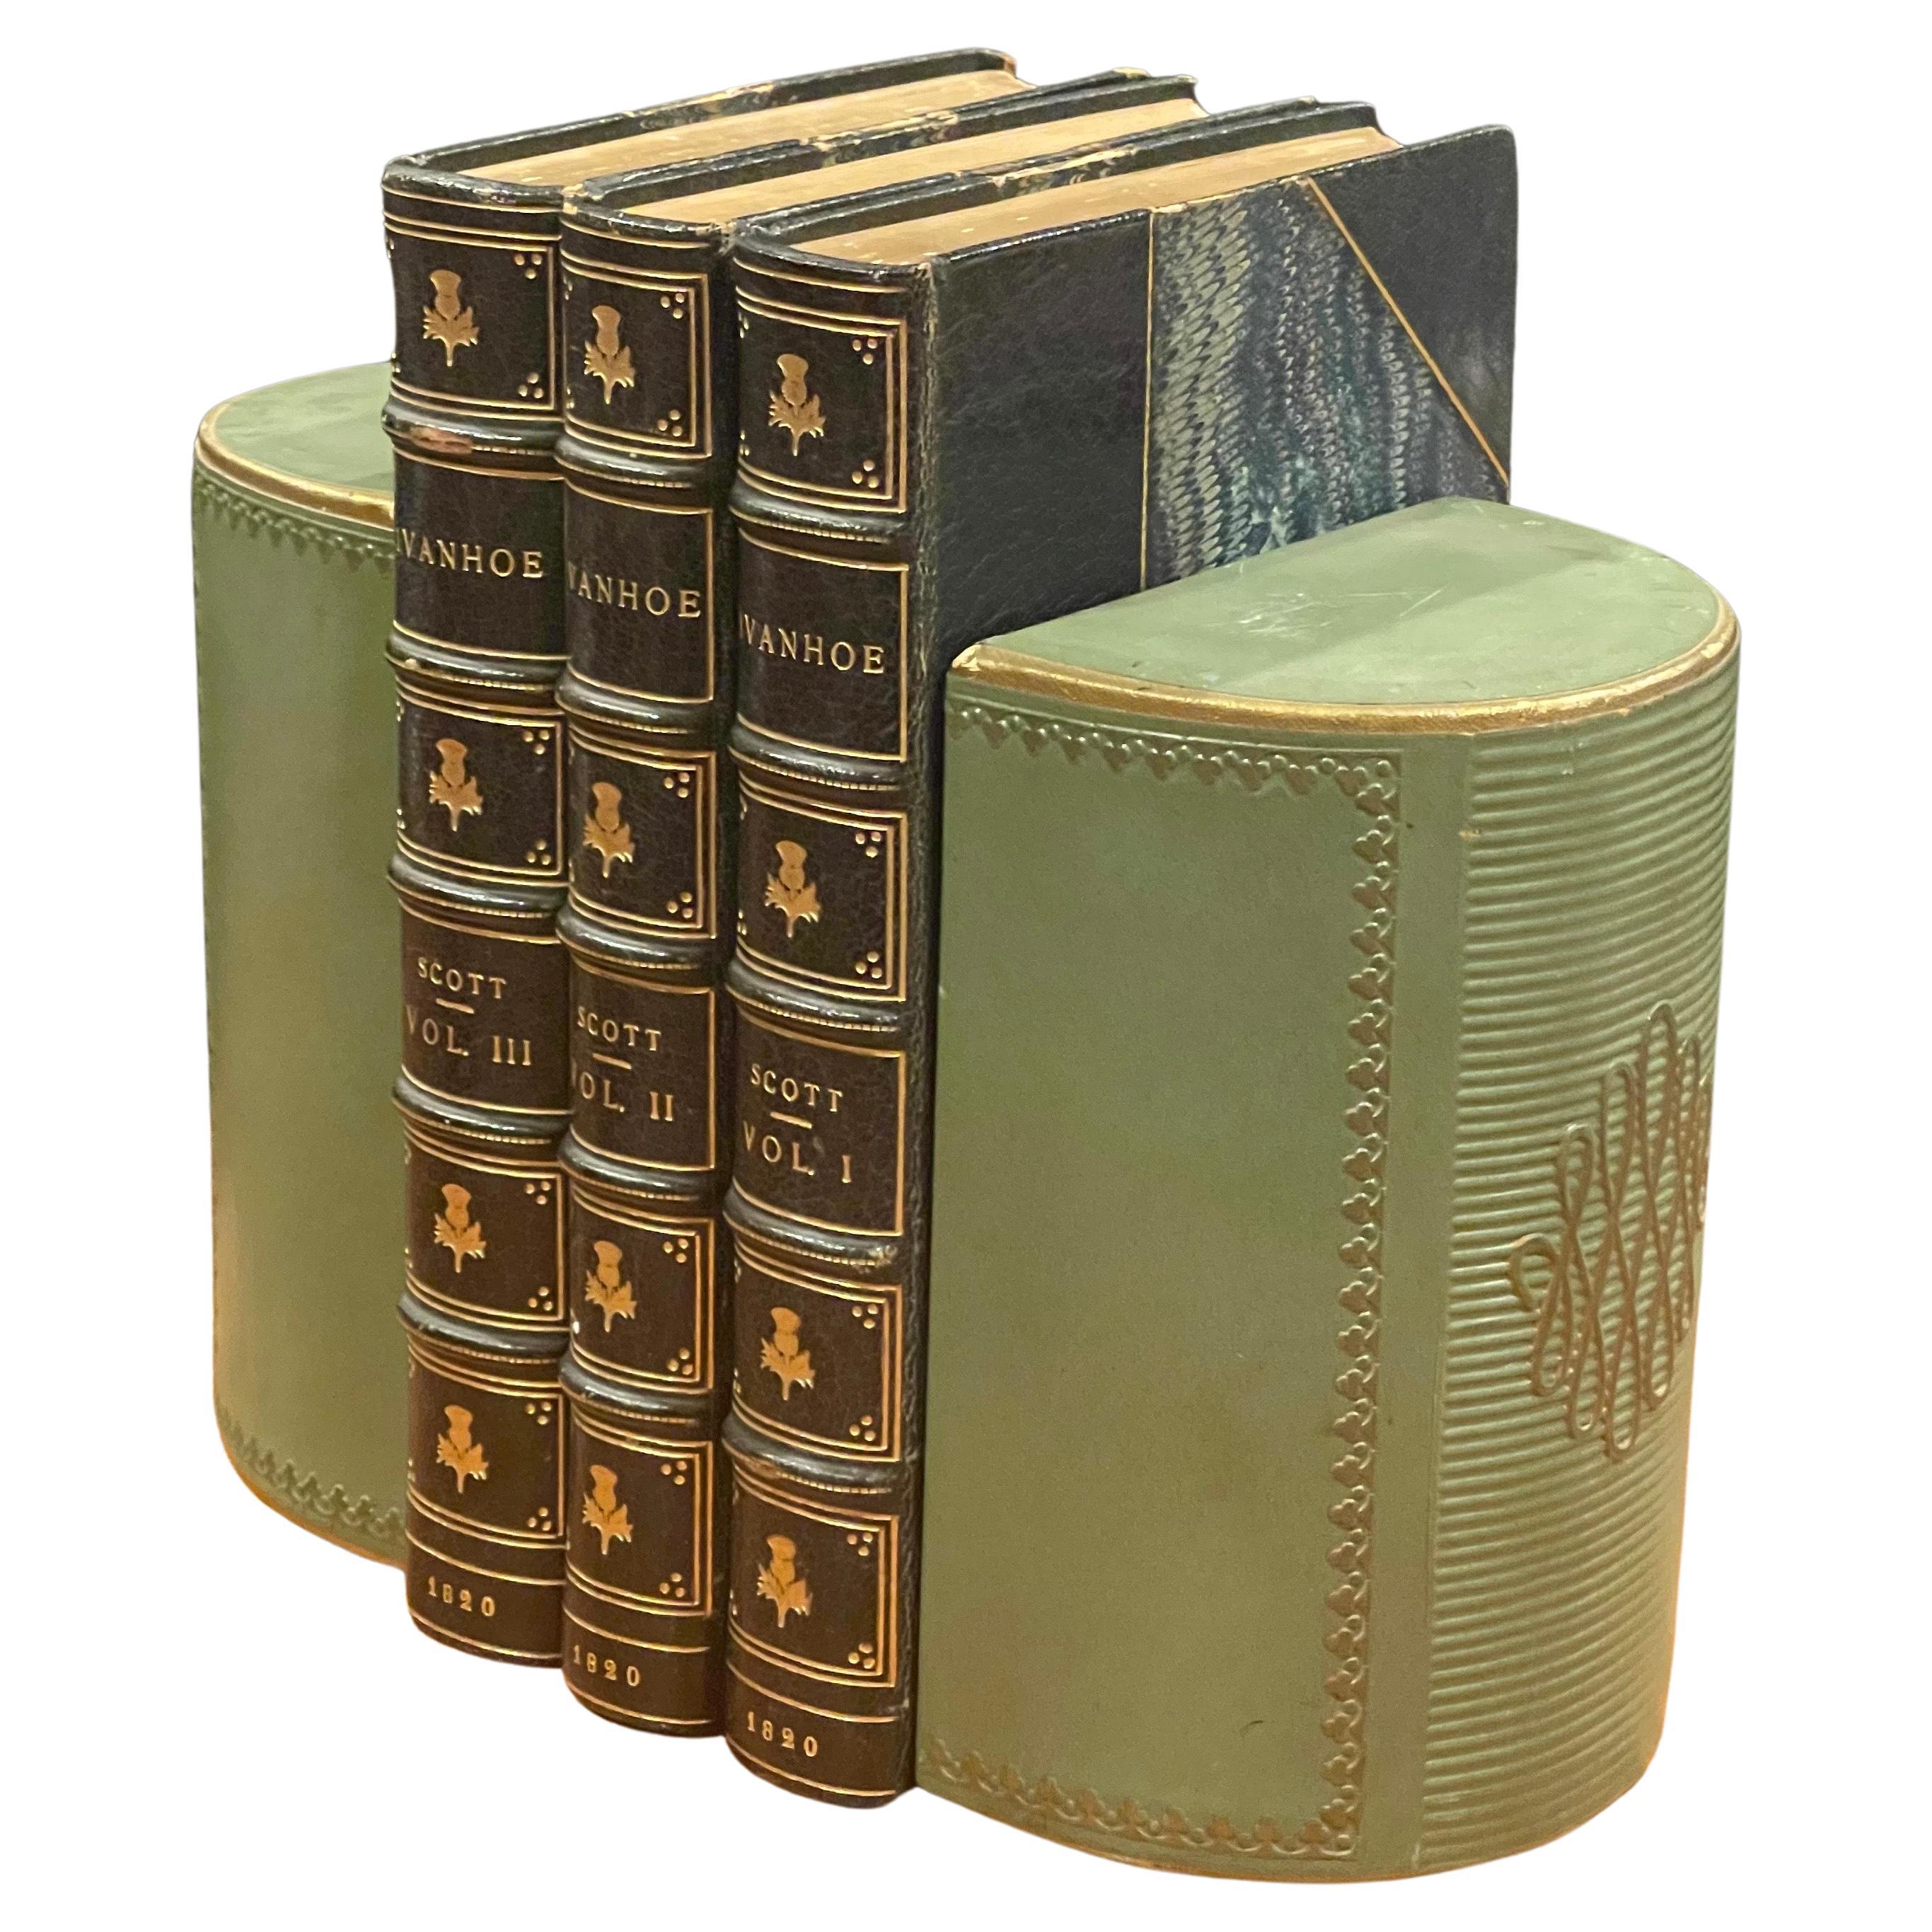 Classic pair of green leather wrapped bookends, circa 1950s. The bookends measure 5.75